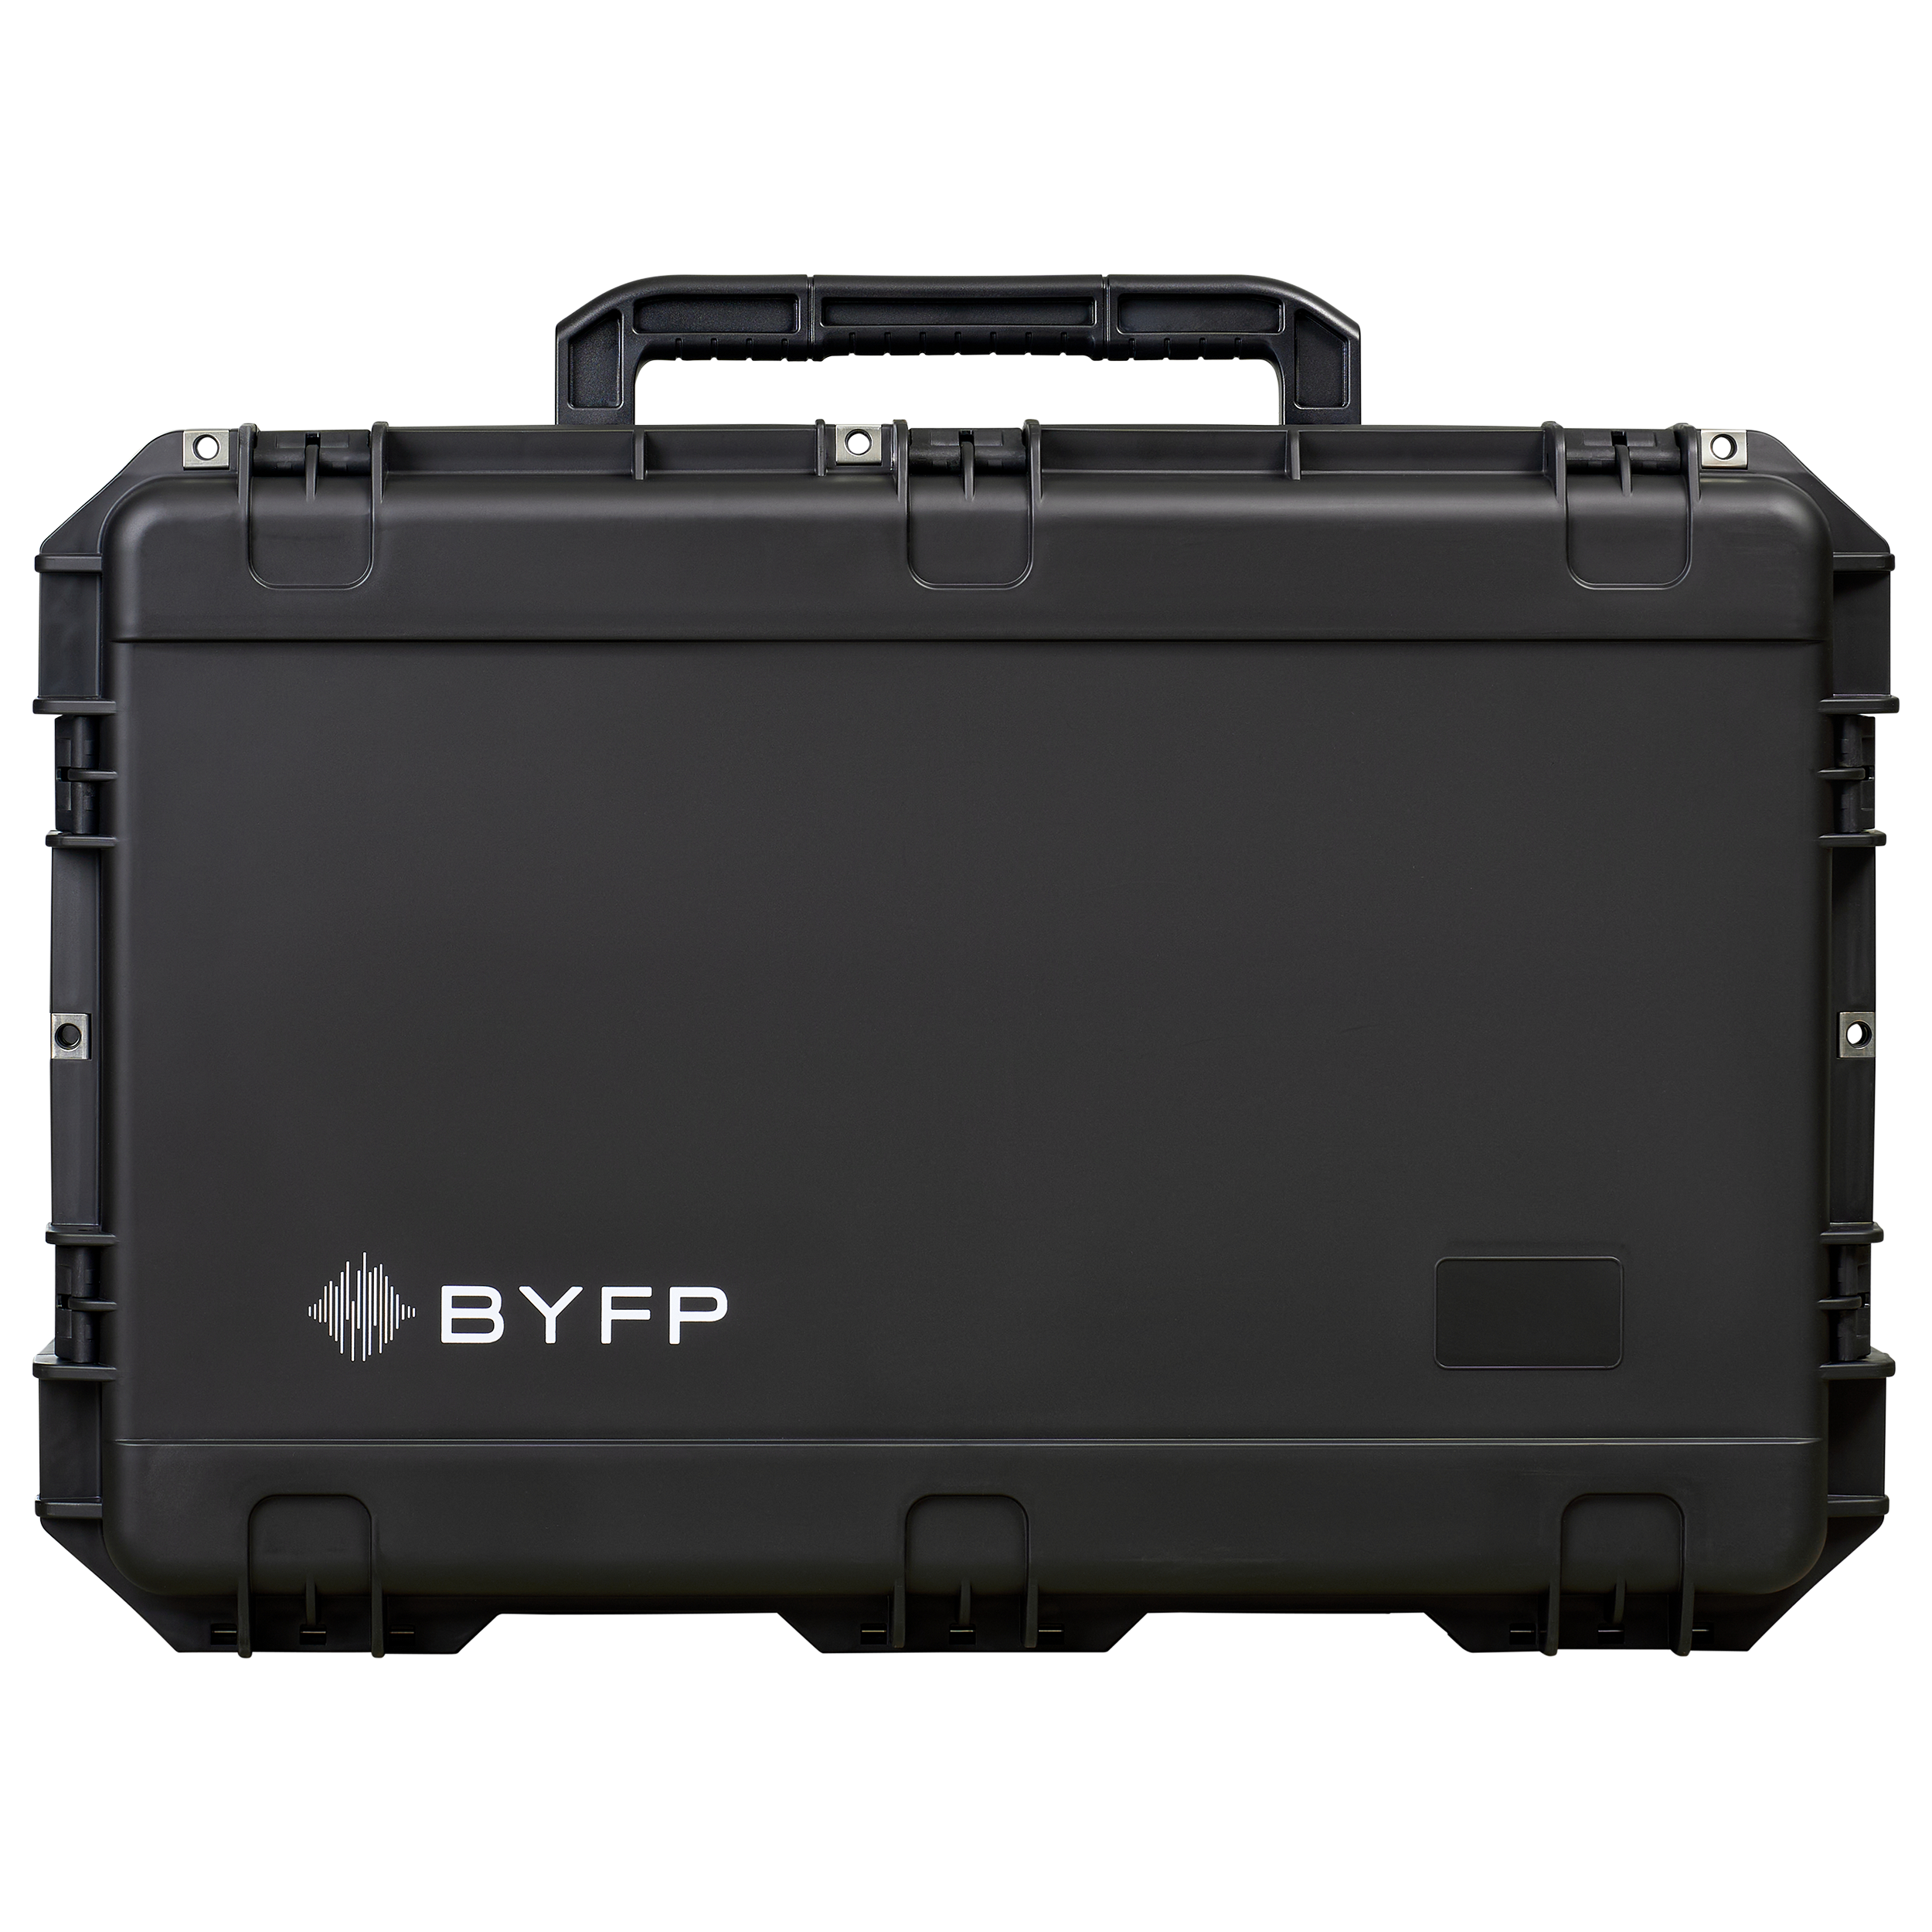 RCF TT808 tourPack with BYFP ipCase